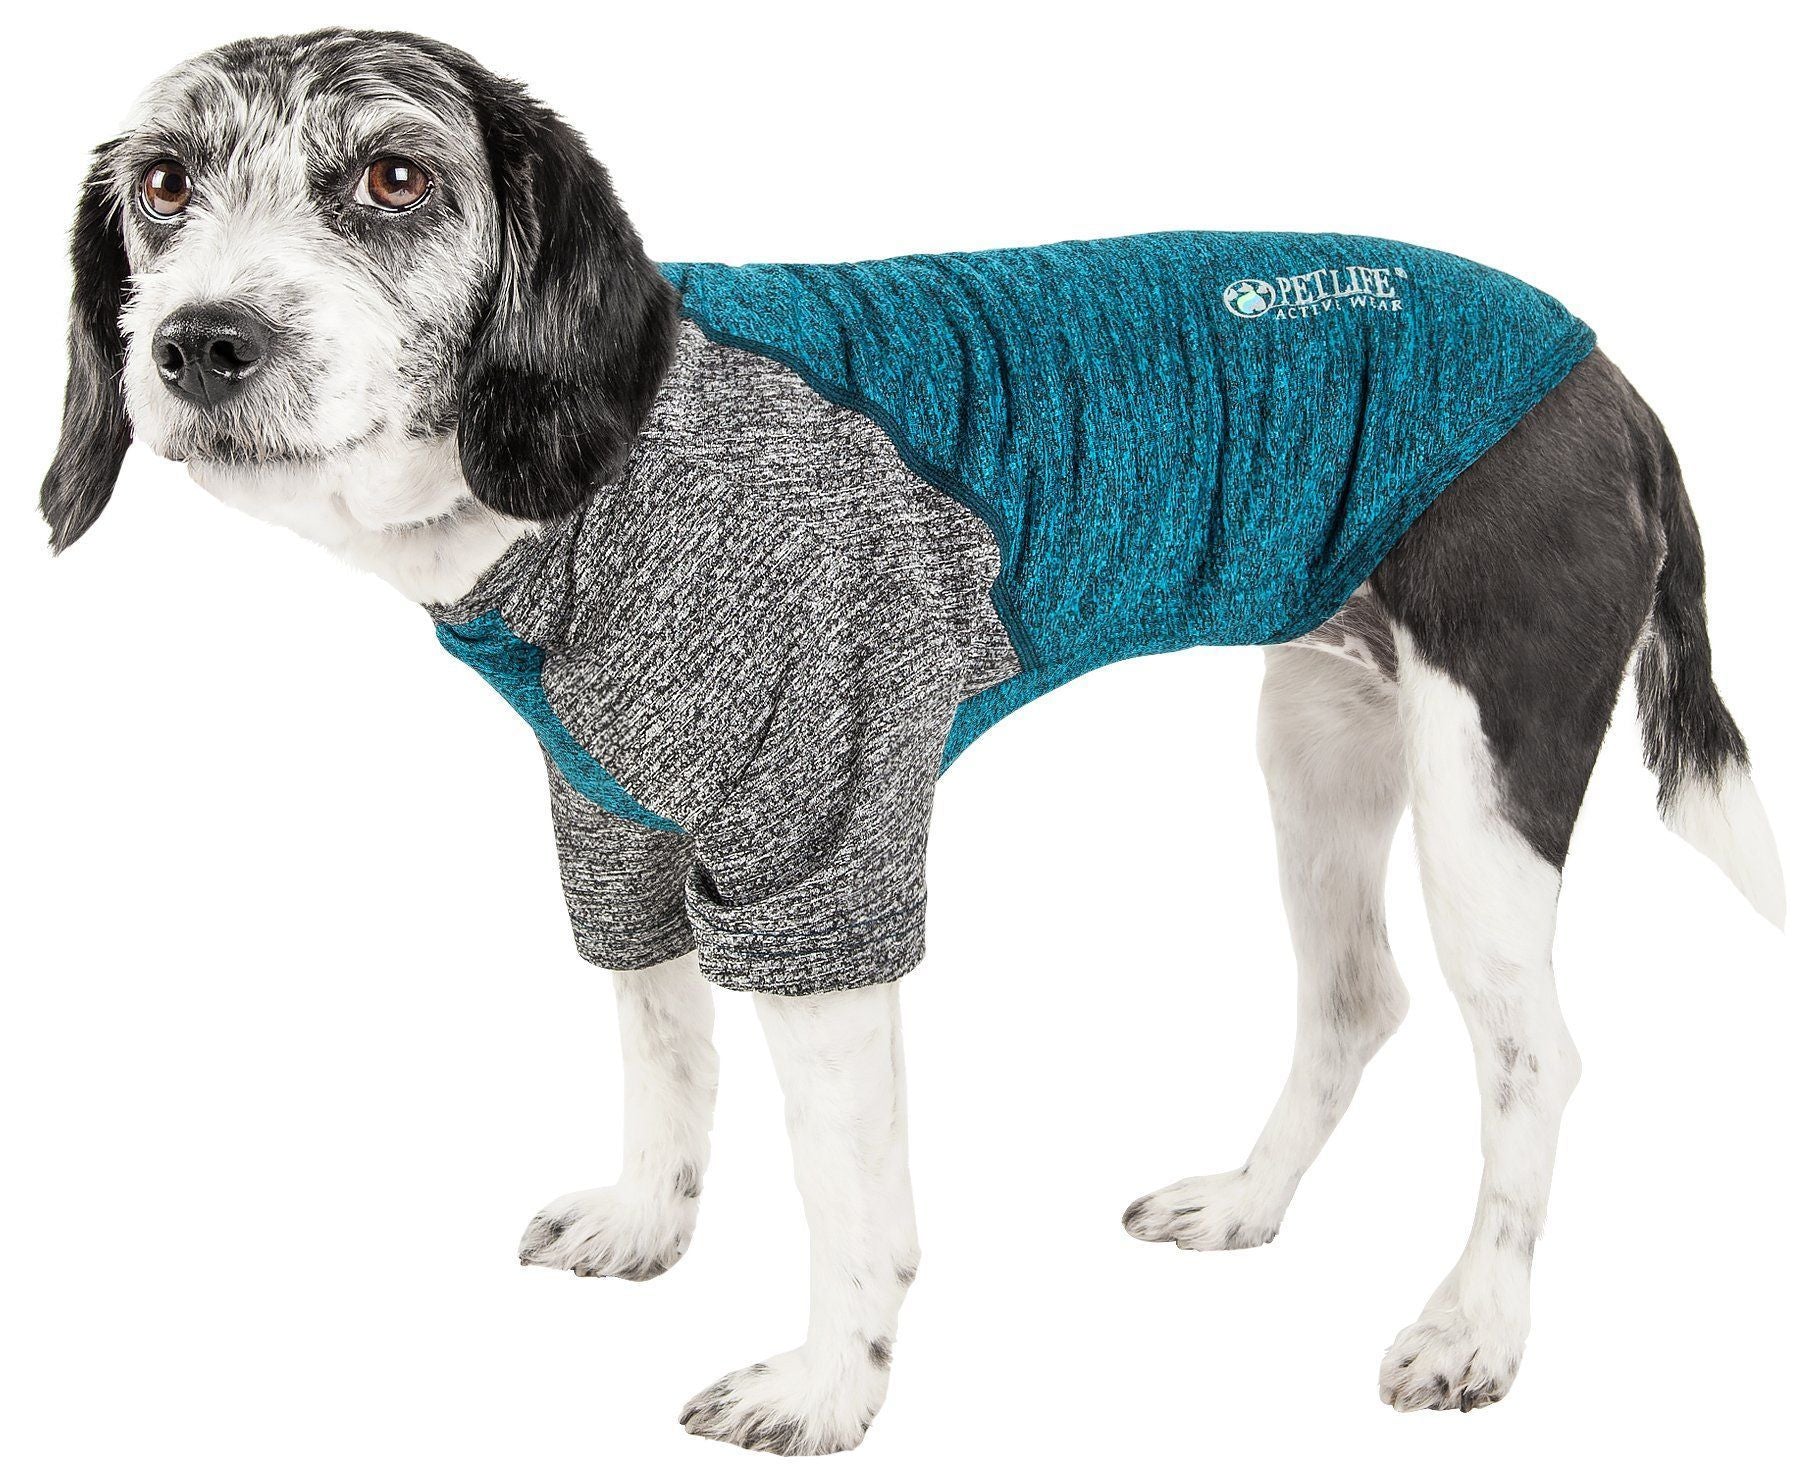 Pet Life ® Active 'Hybreed' 4-Way-Stretch Fitness Performance Dog T-Shirt X-Small Teal/Gray